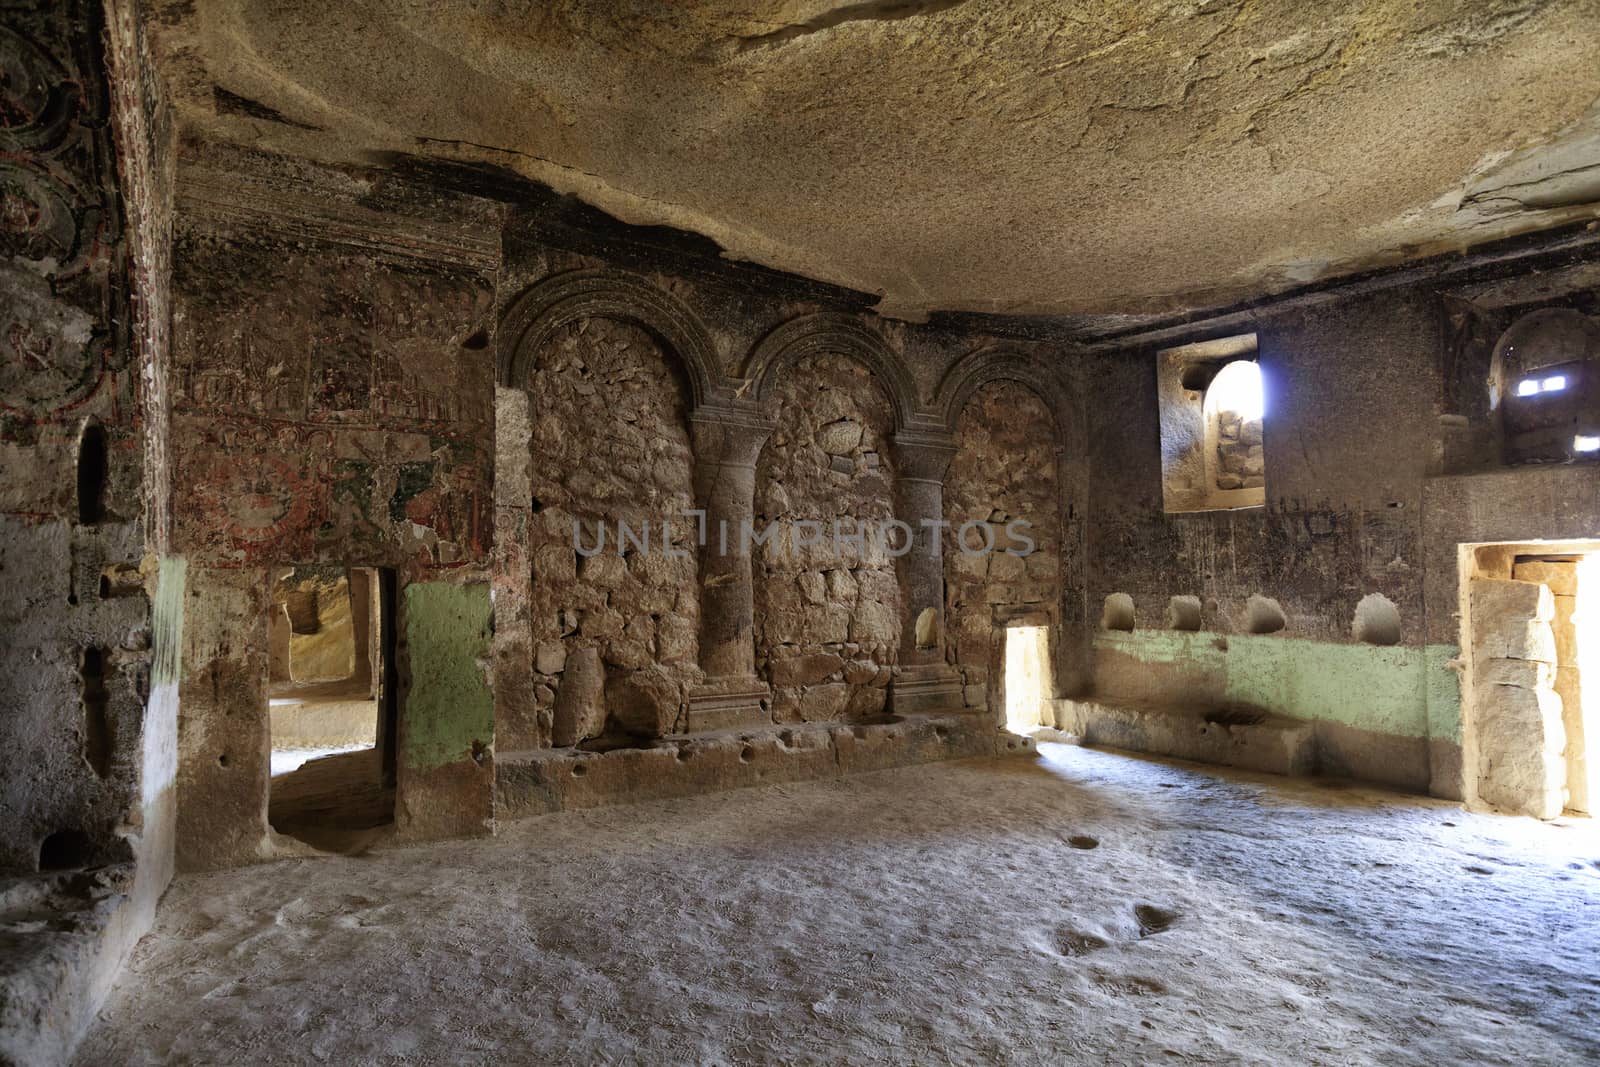 Ancient frescoes on the ruins of the stone walls of an antique church hollowed out of an old sandstone rock in the valley of Cappadocia